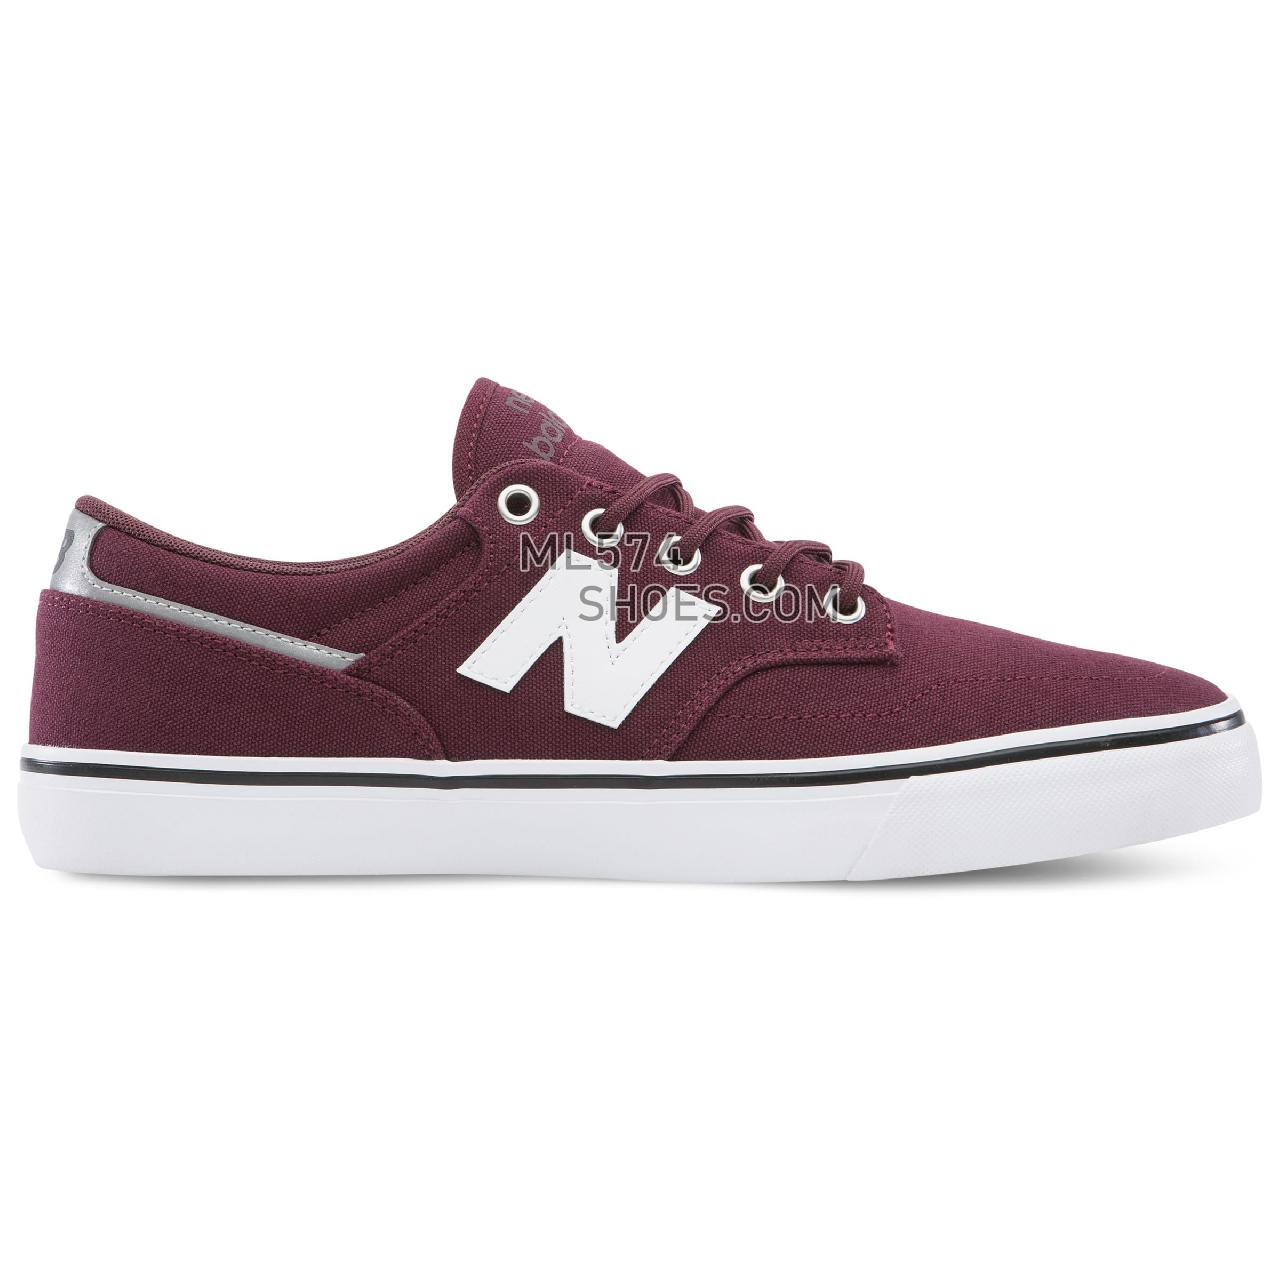 New Balance 331 - Men's 331 - Classic Burgundy with White - AM331BRG